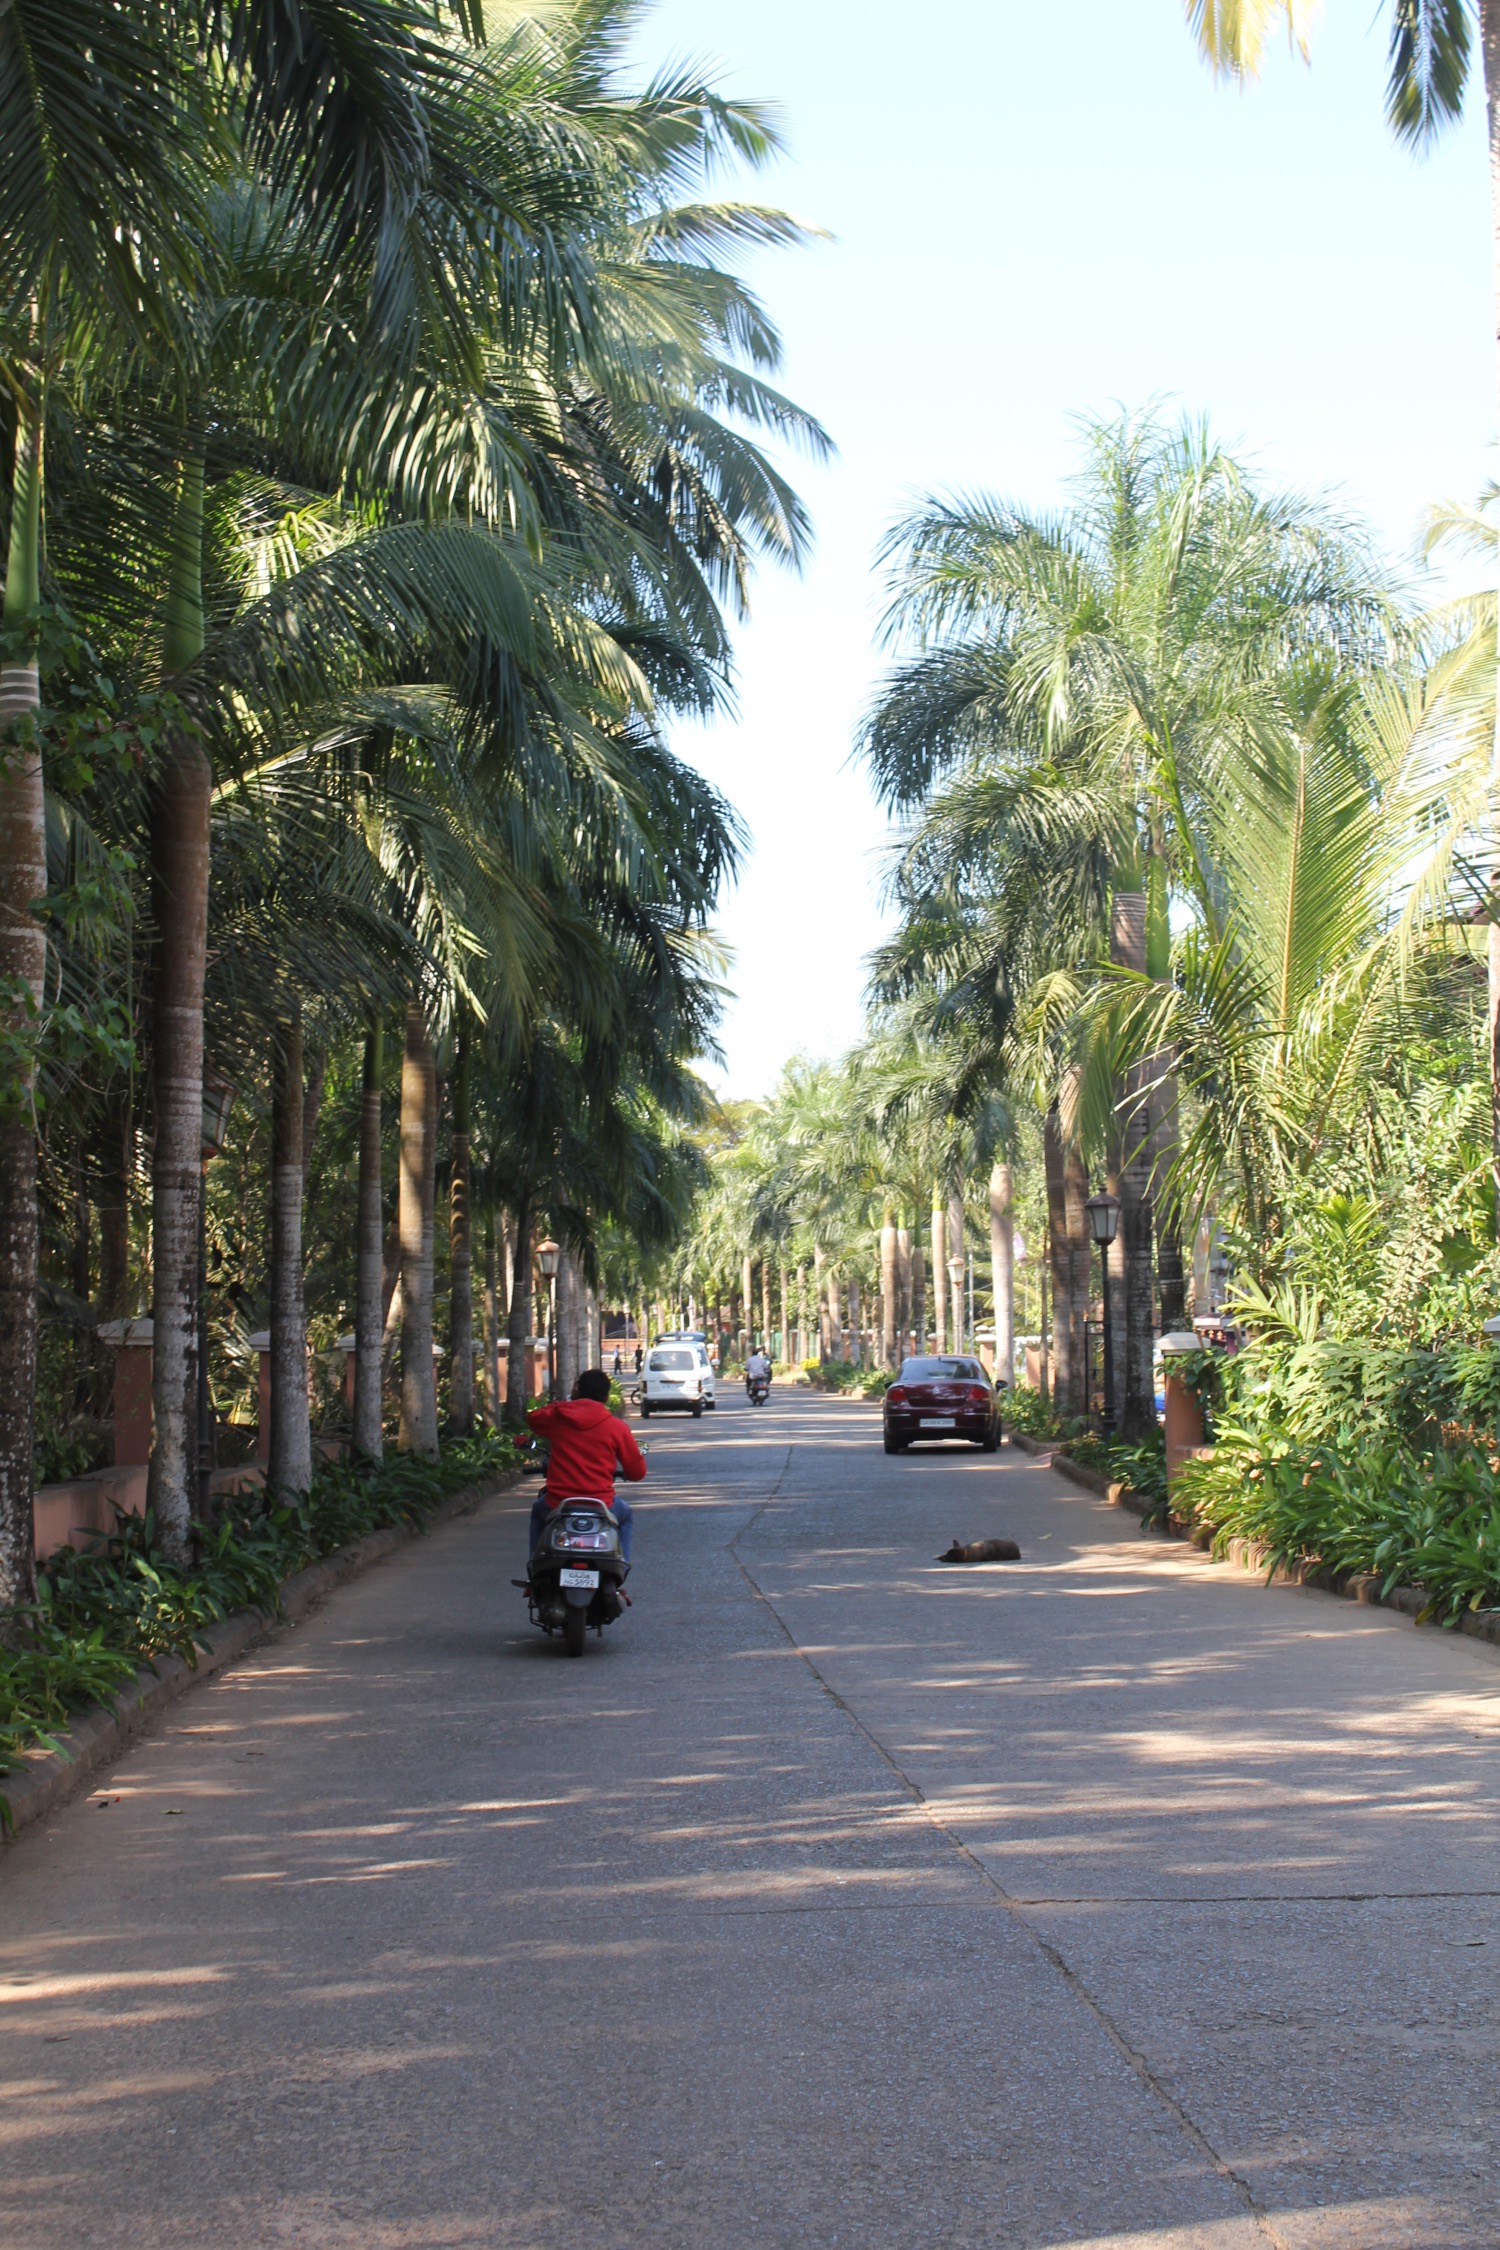 a person riding a motorcycle on a road with palm trees